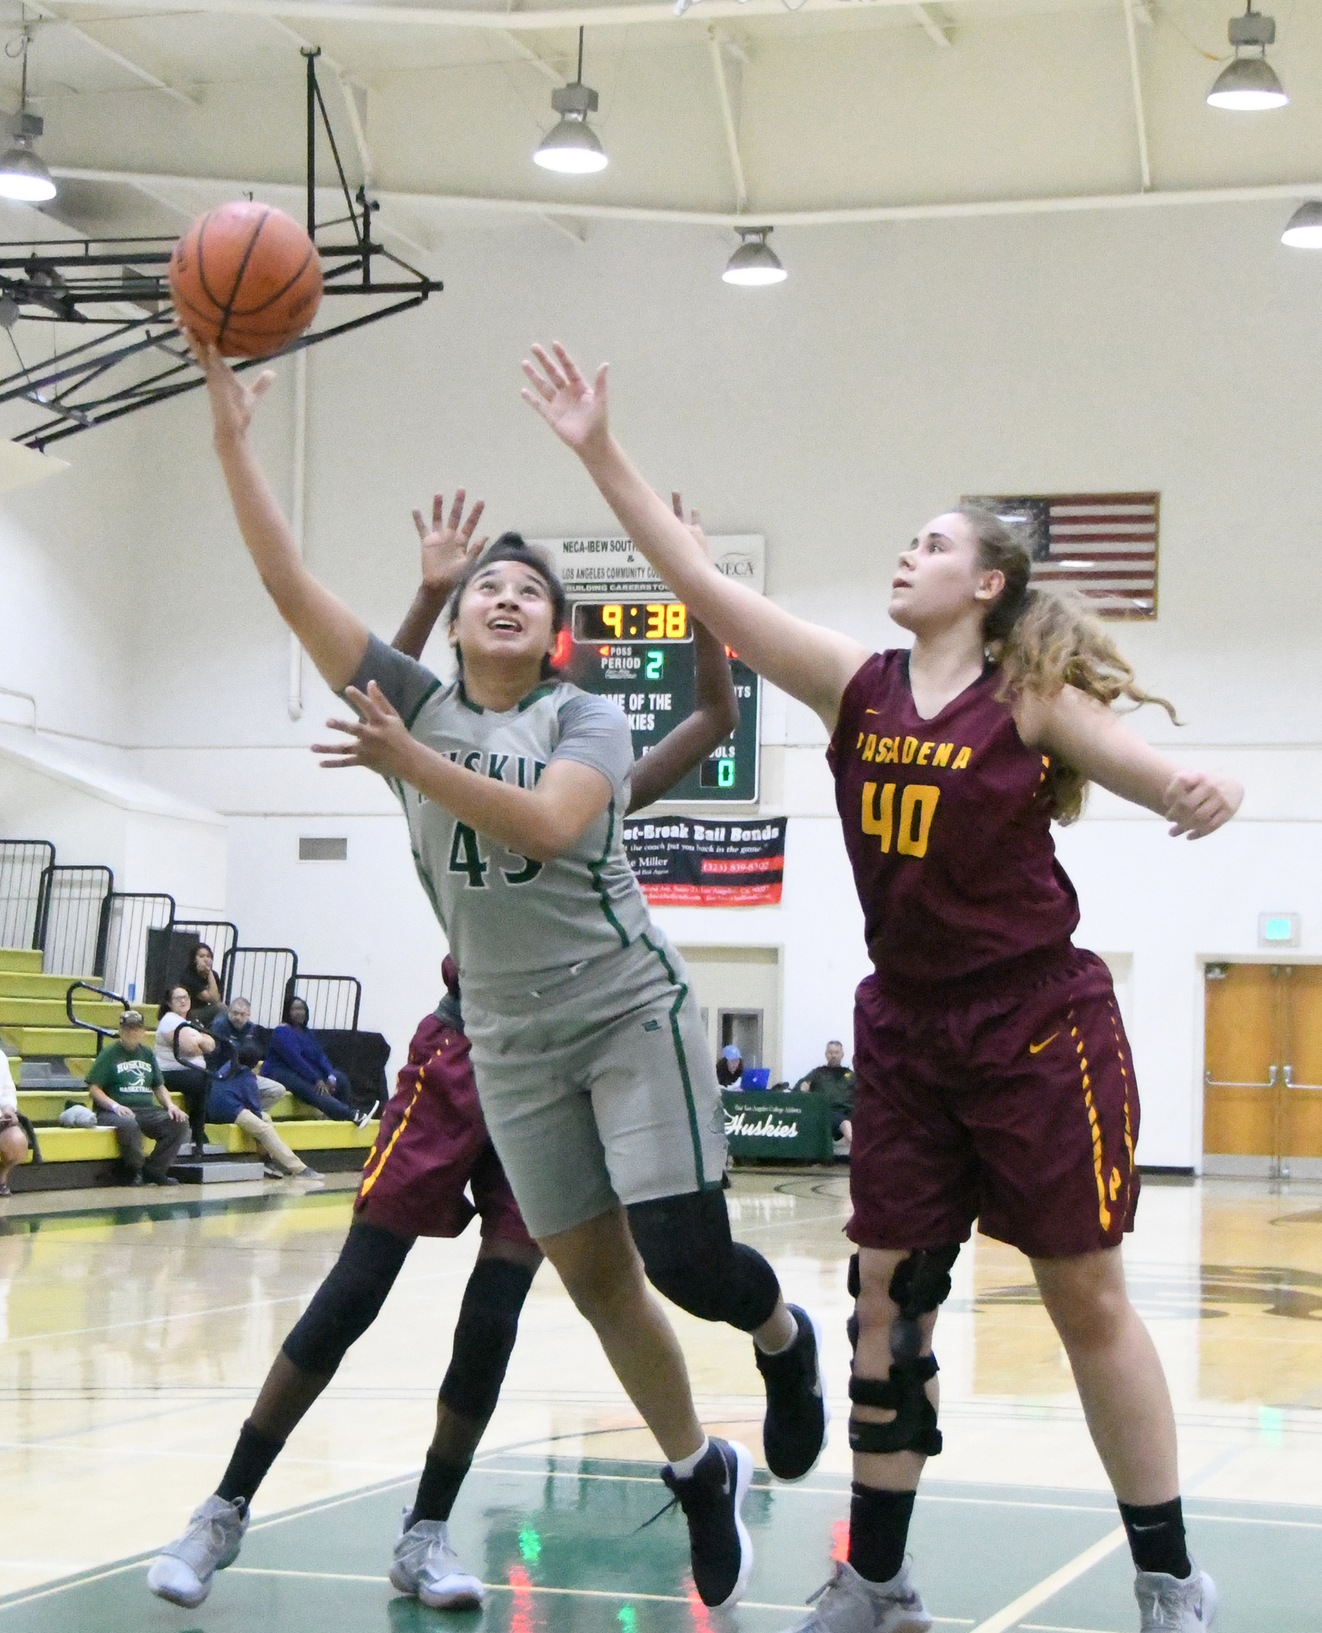 The 10th-ranked East Los Angeles College Lady Huskies lost 73-69 in overtime to unranked Pasadena City College on Feb. 2. (Photo taken Jan. 17 by DeeDee Jackson)